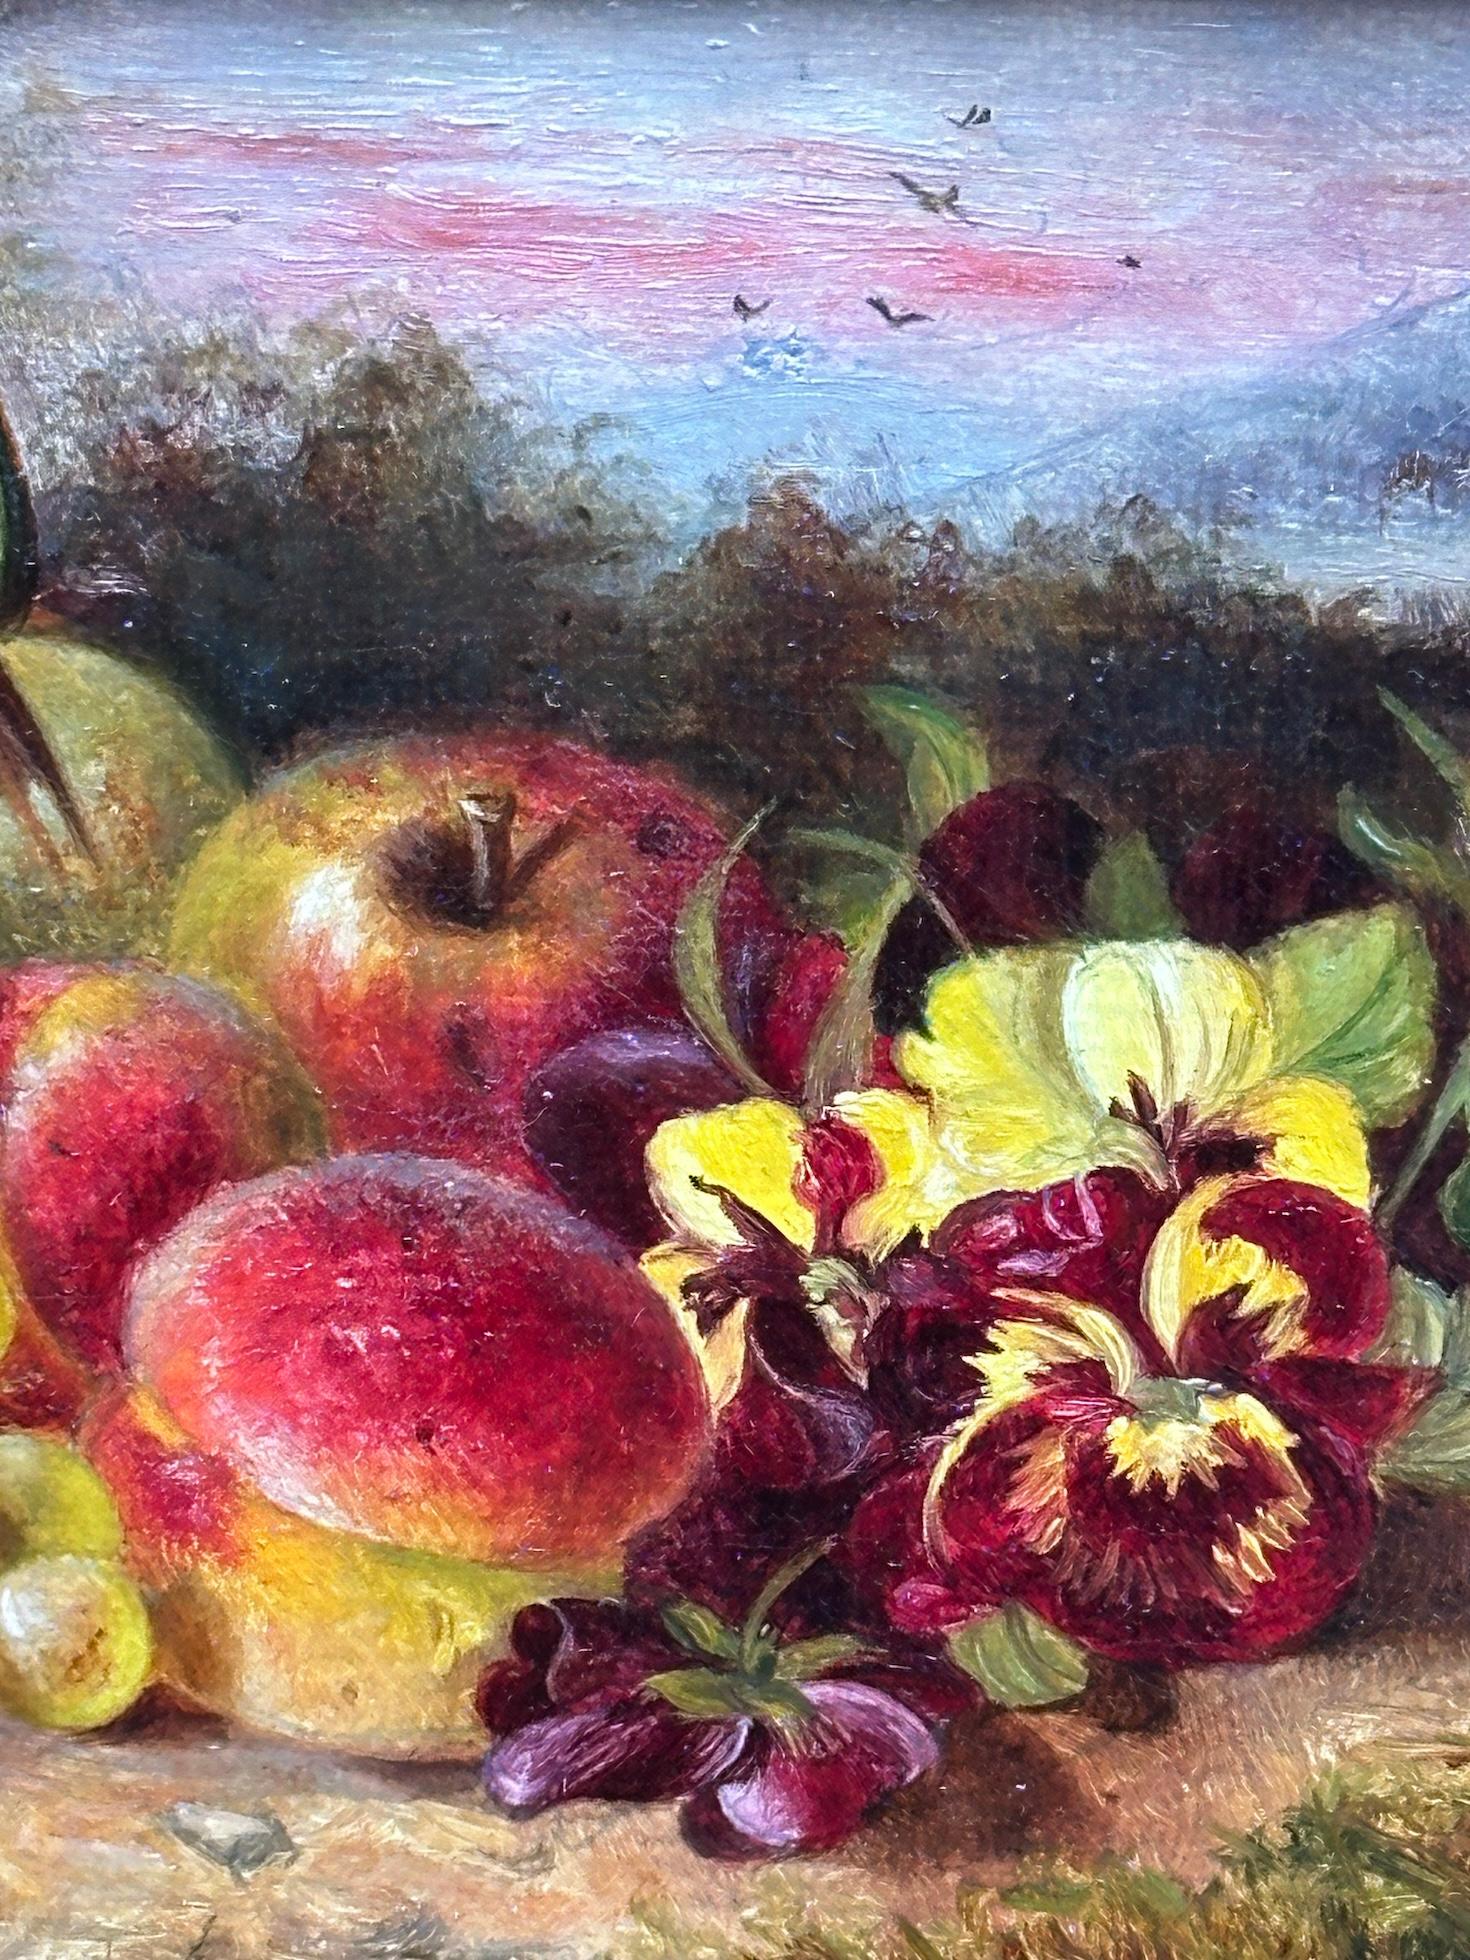 19th century English still life of fruit, apples, pears, birds nest, flowers For Sale 2